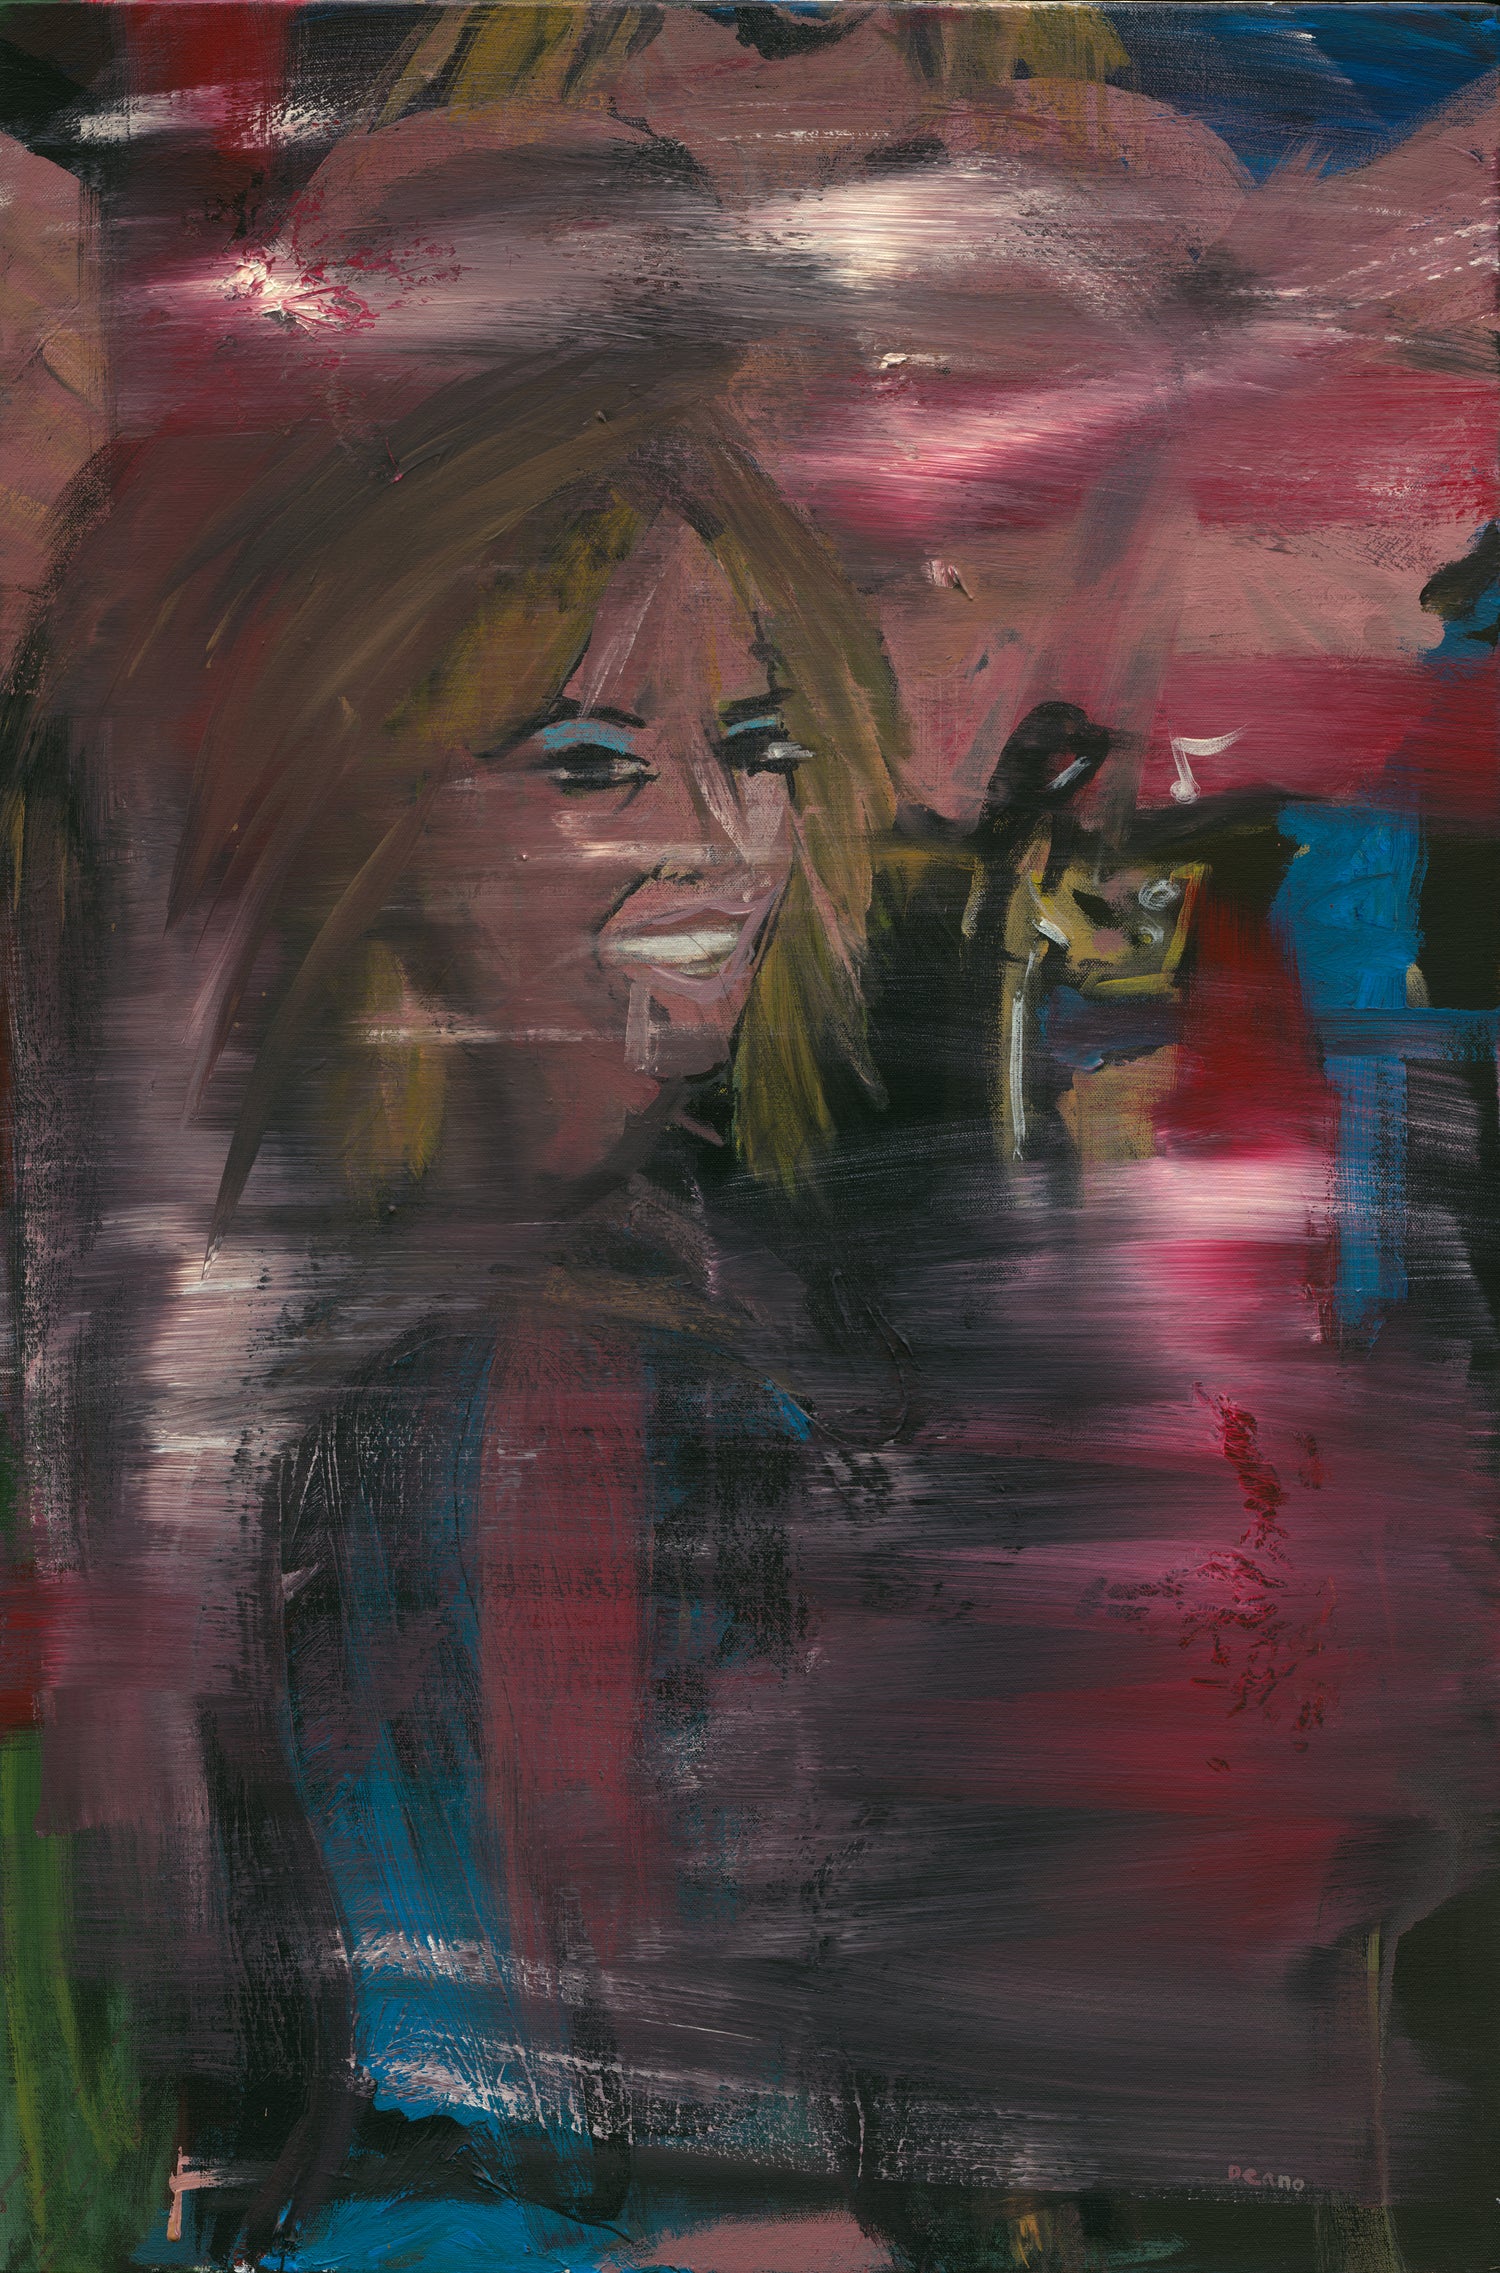 Acrylic on canvas abstract, original painting featuring a smiling DJ surrounded by a vibrant and blurred club scene in bright pinks and blues.